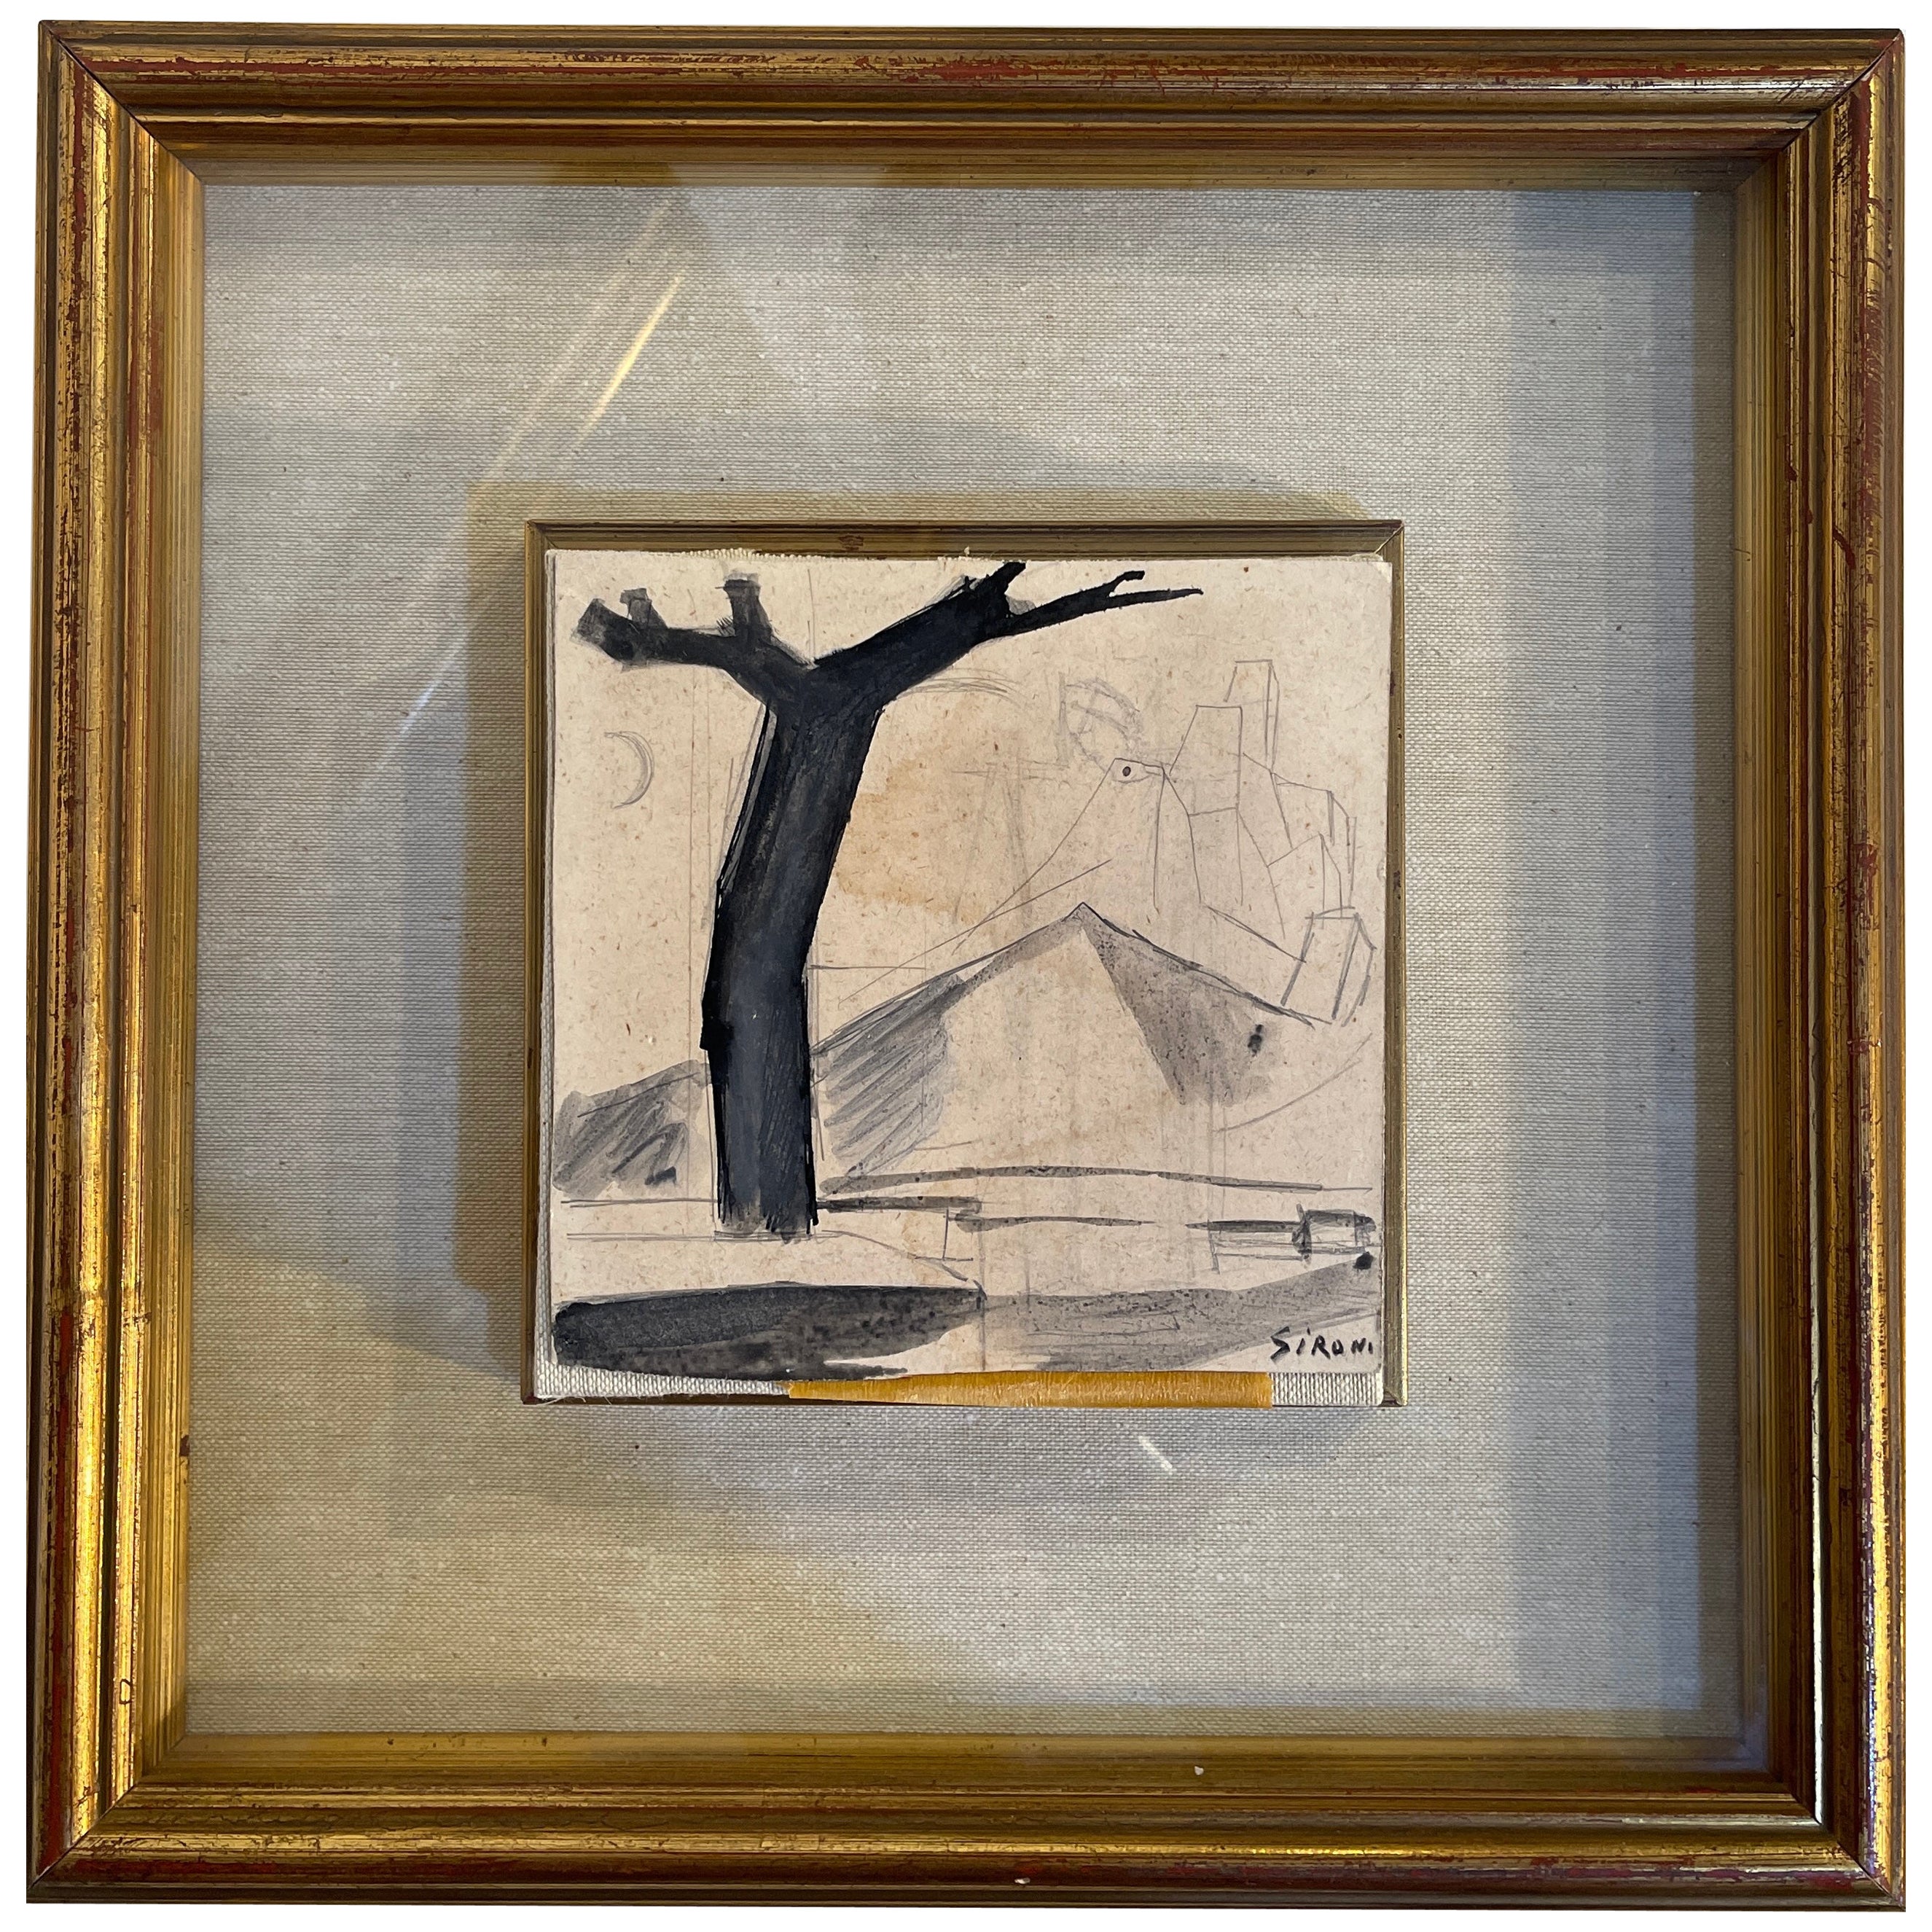 Drawing on cardboard, landscape with tree, Sironi